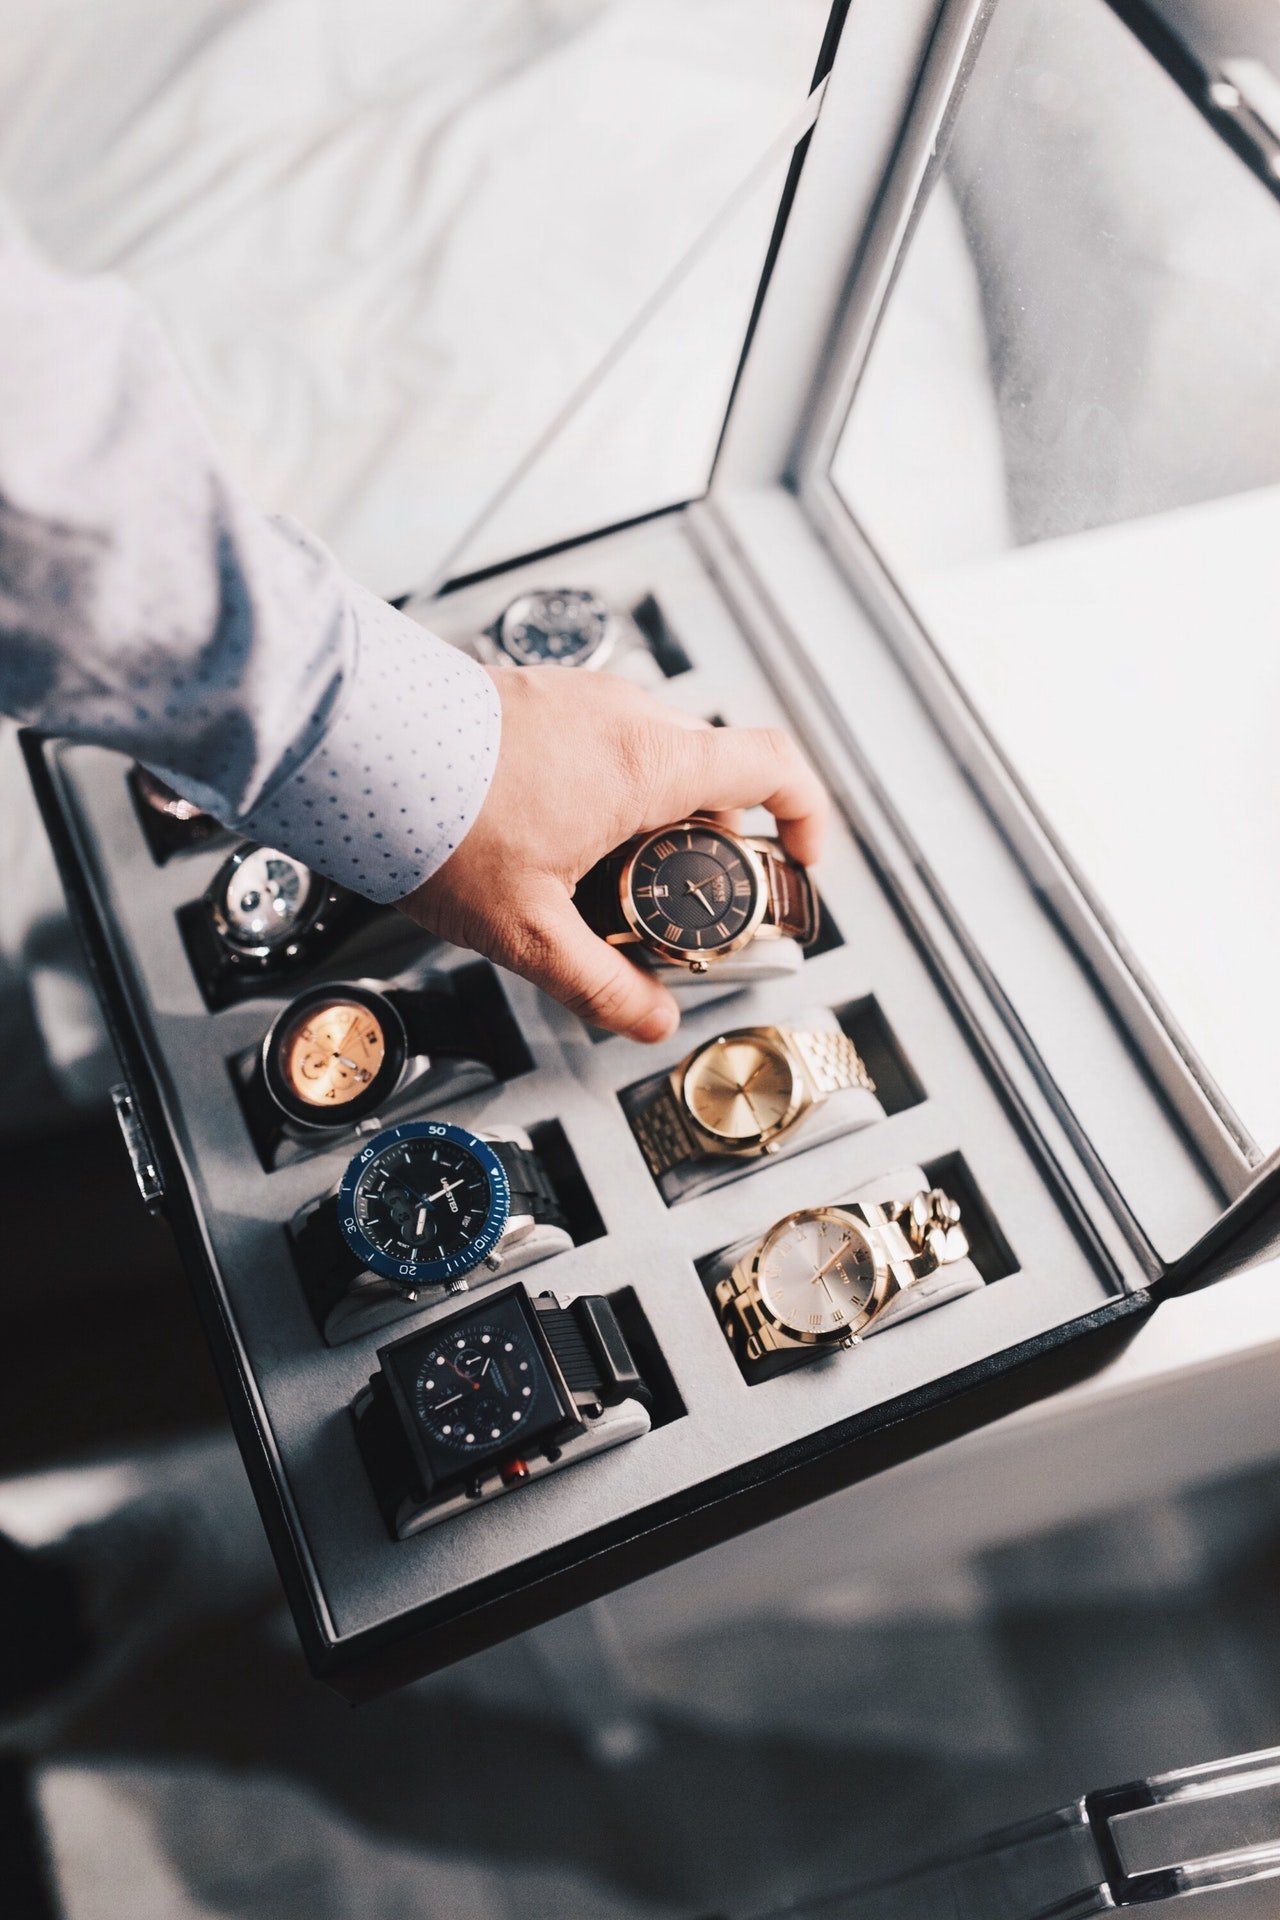 Collection of watches in a display case. | Source: Pexels